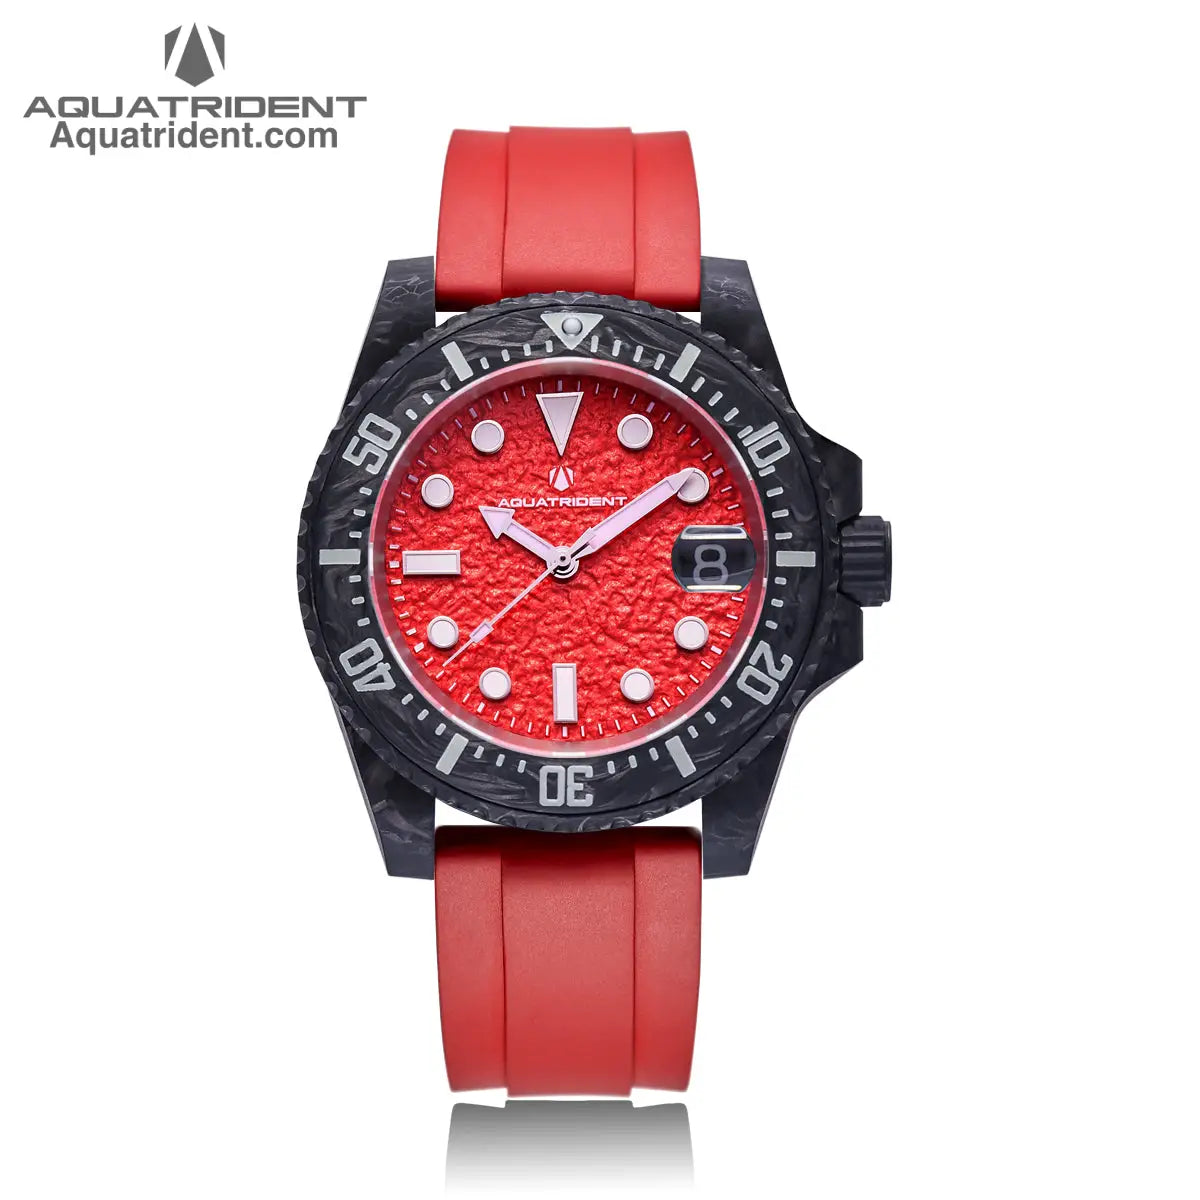 black carbon fiber case and bezel-red rough textured dial with dates-red fluororubber strap-watch